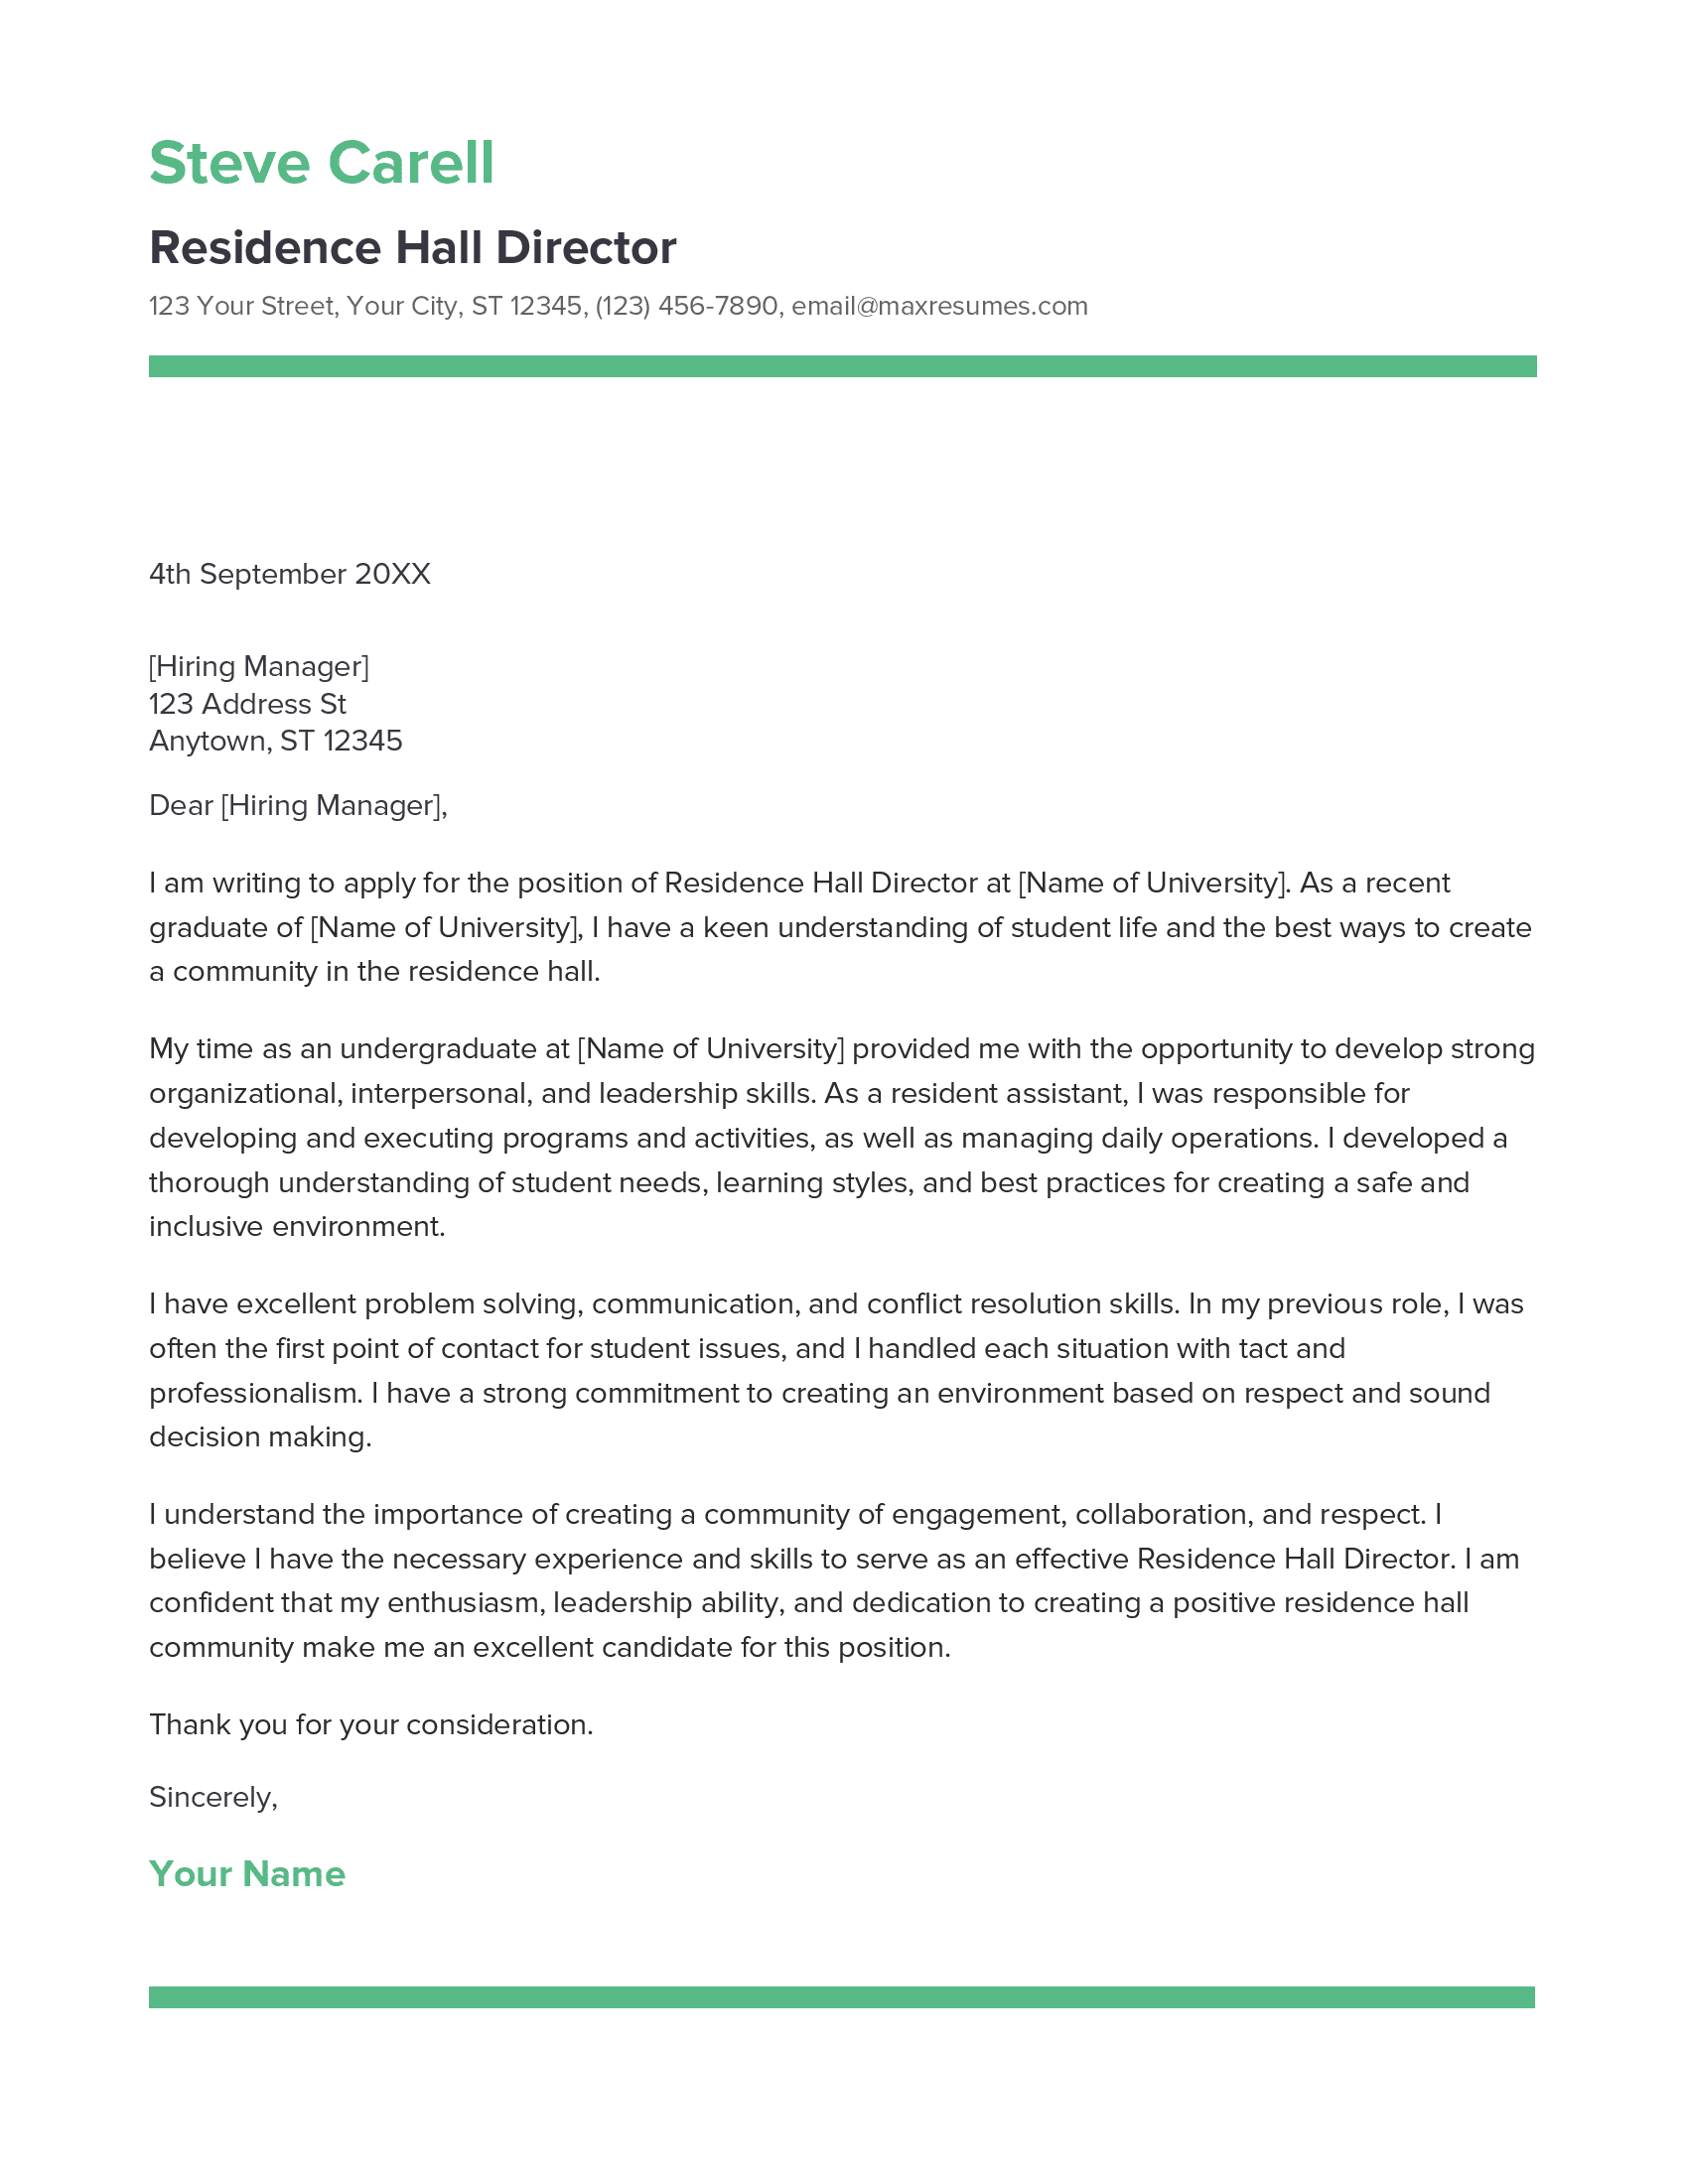 Residence Hall Director Cover Letter Example